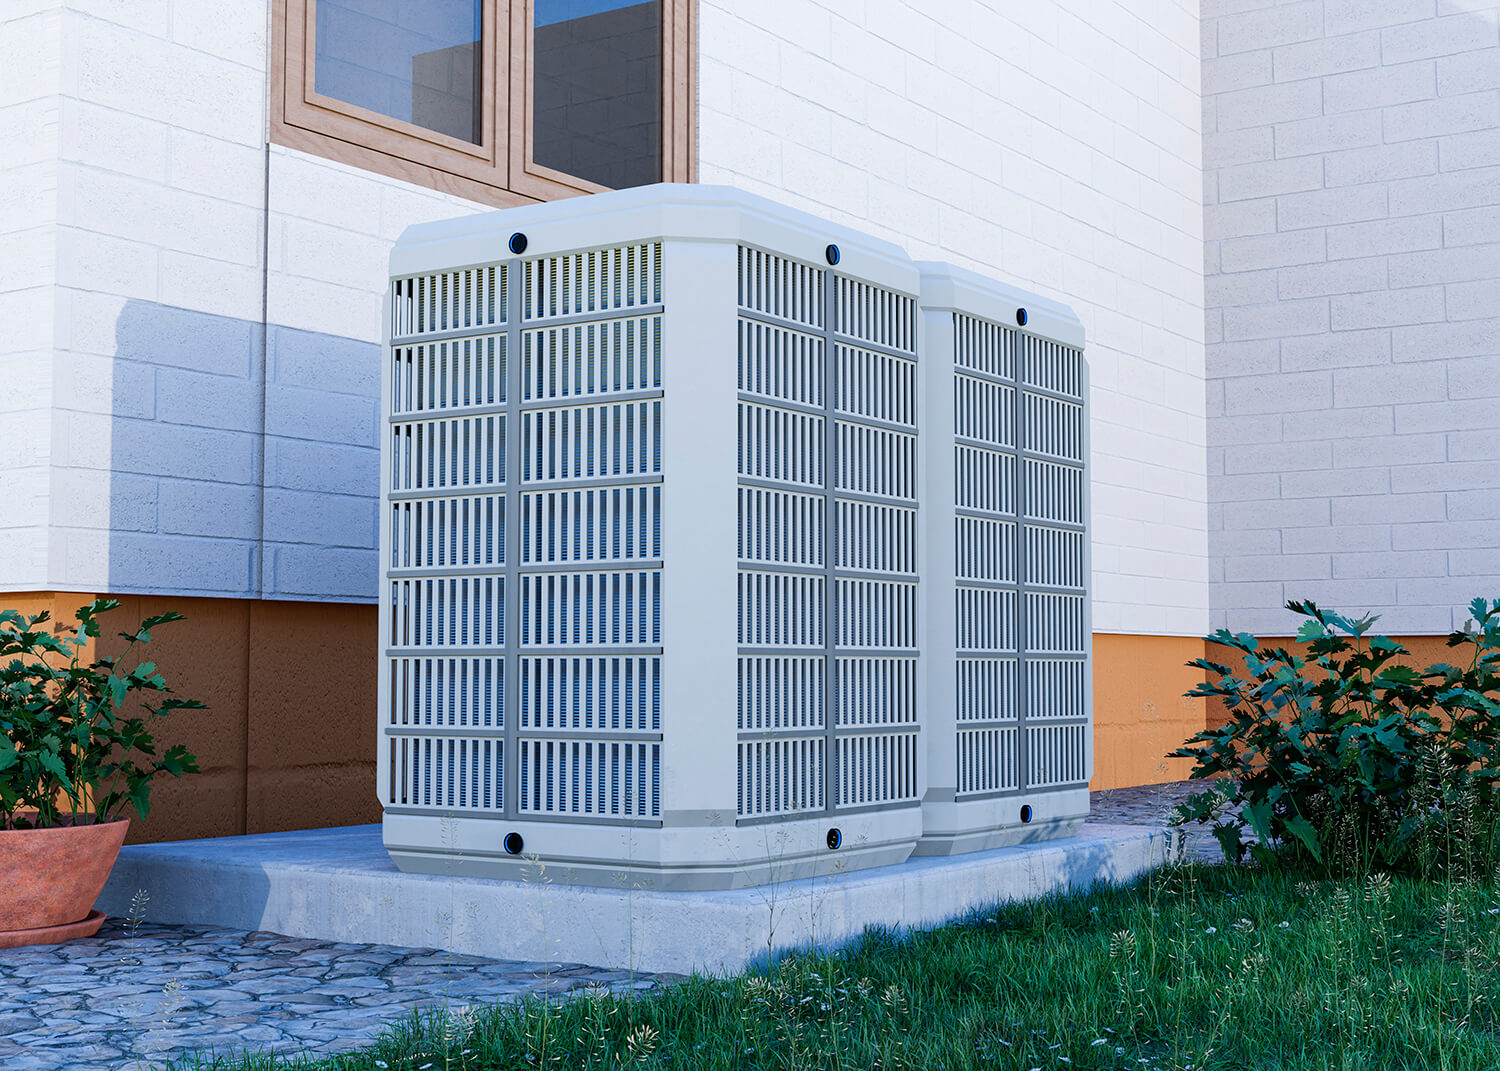 We are looking for a/c service in Jacksonville FL